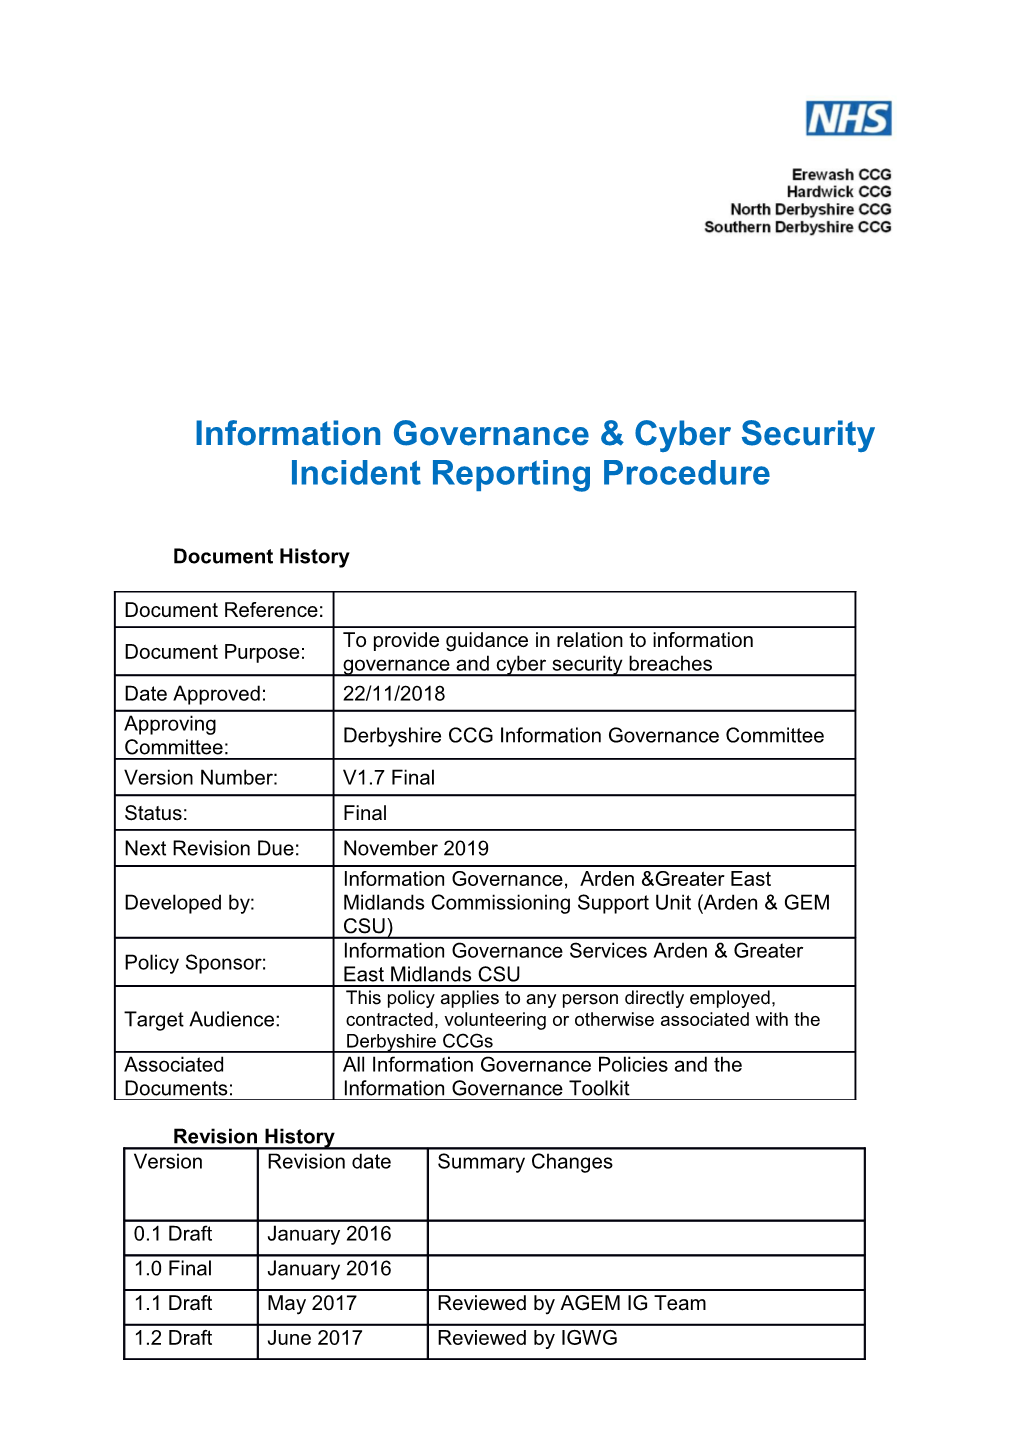 Information Governance & Cyber Security Incident Reporting Procedure